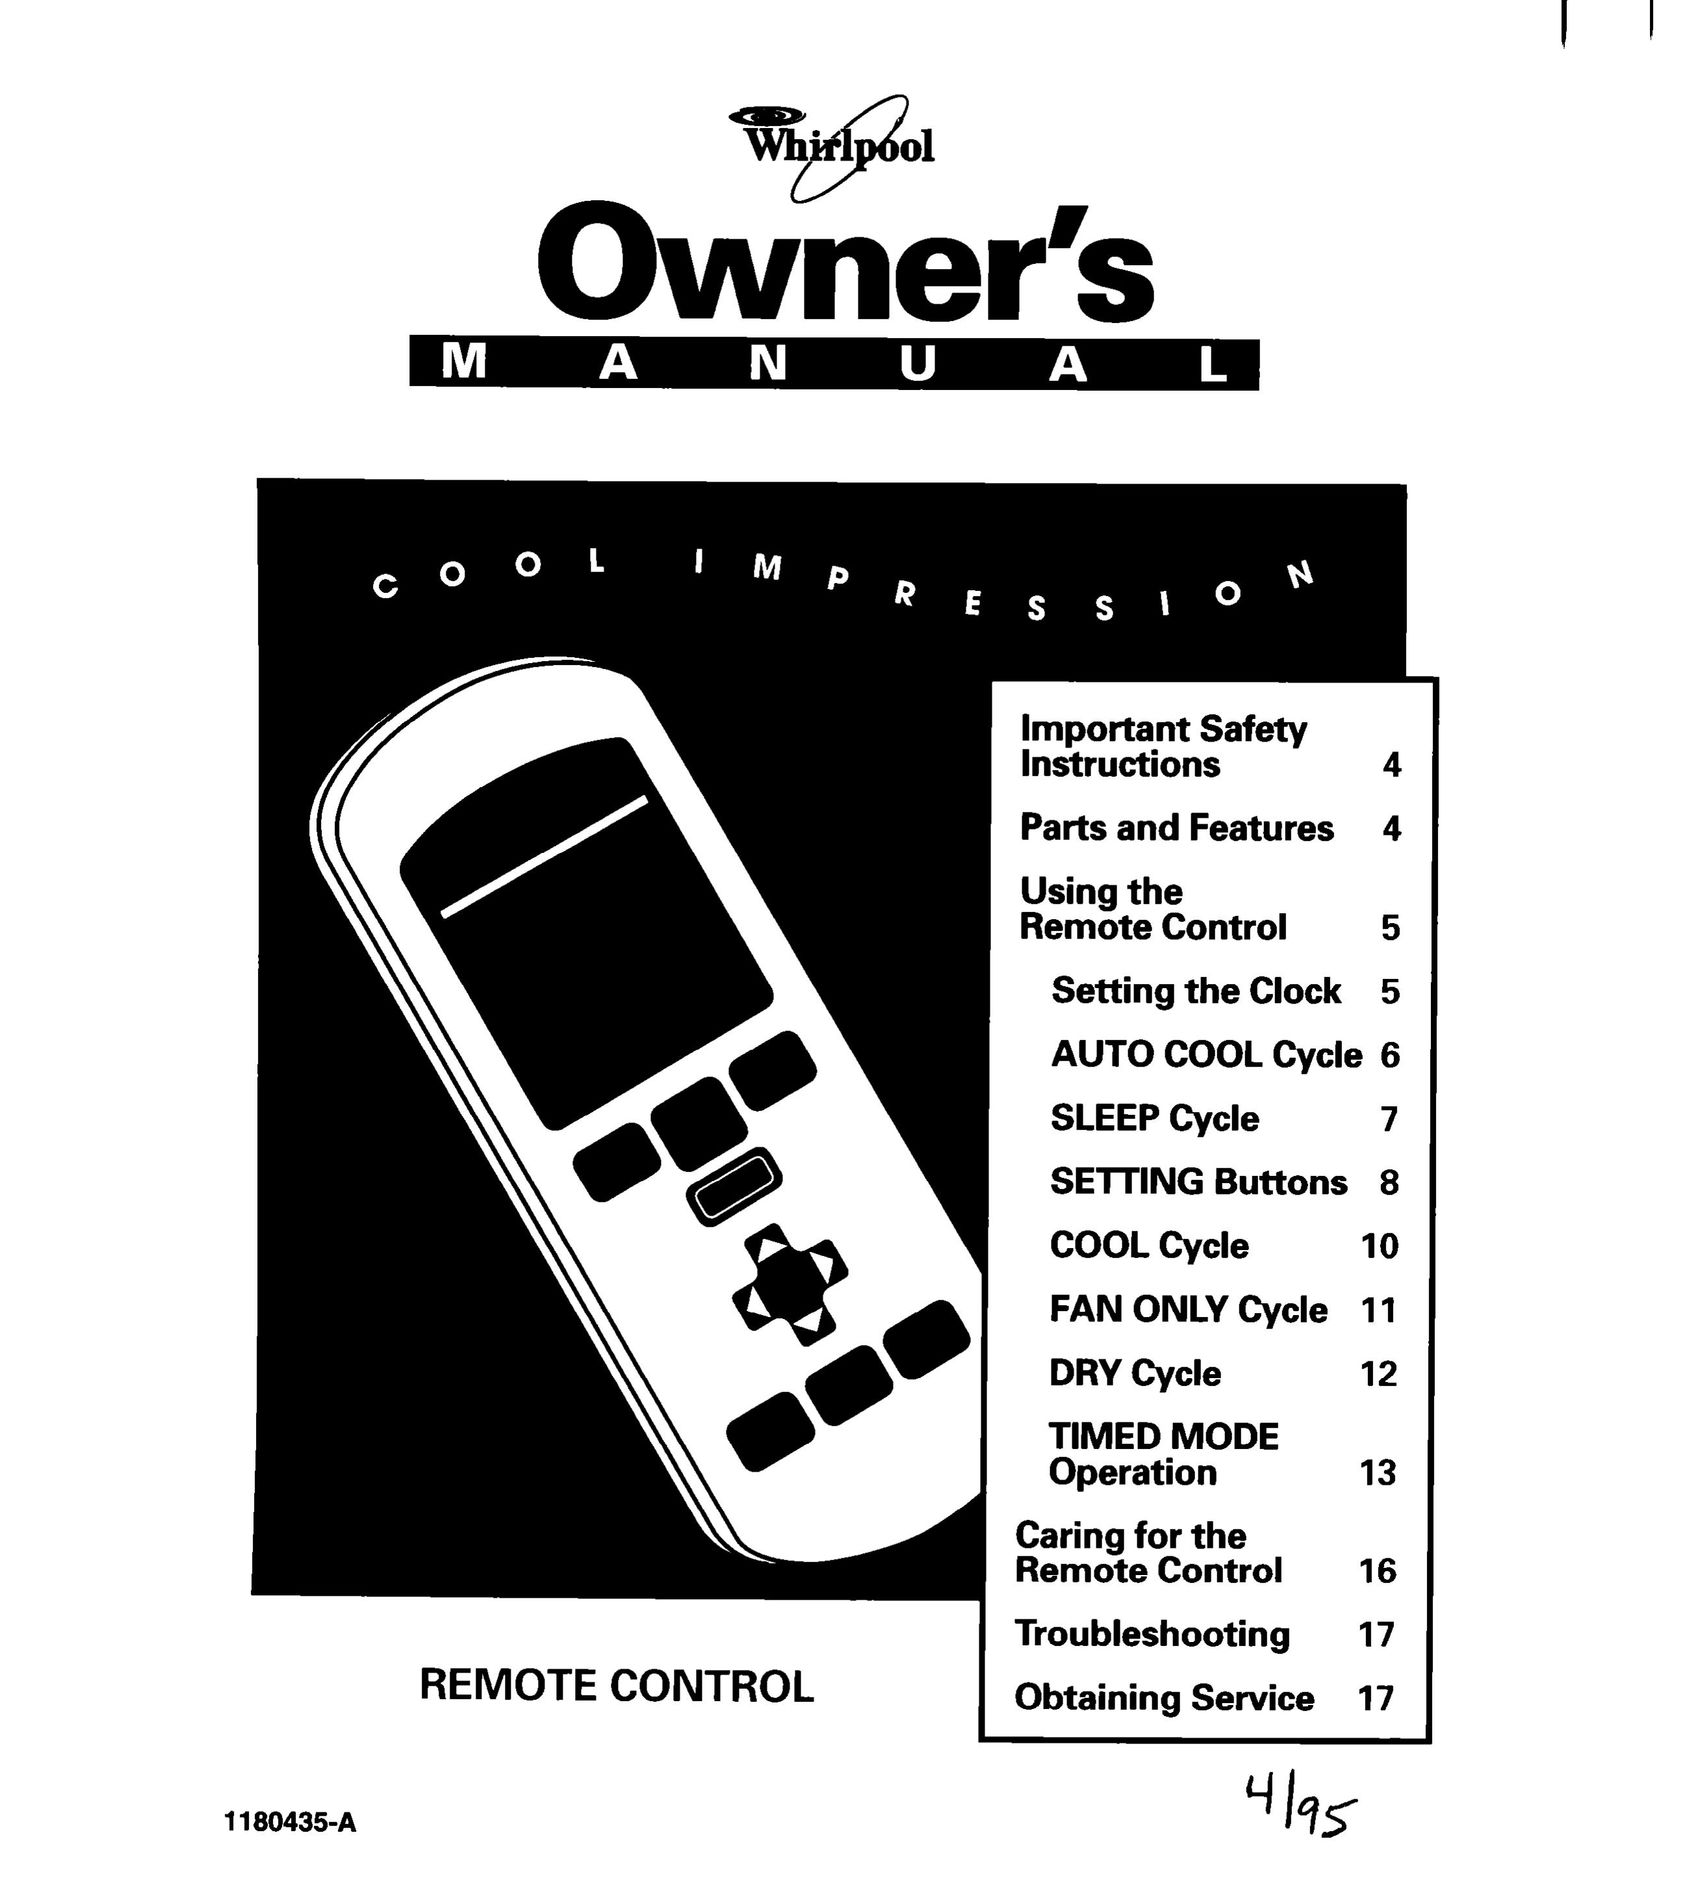 Whirlpool 1180435-A Universal Remote User Manual